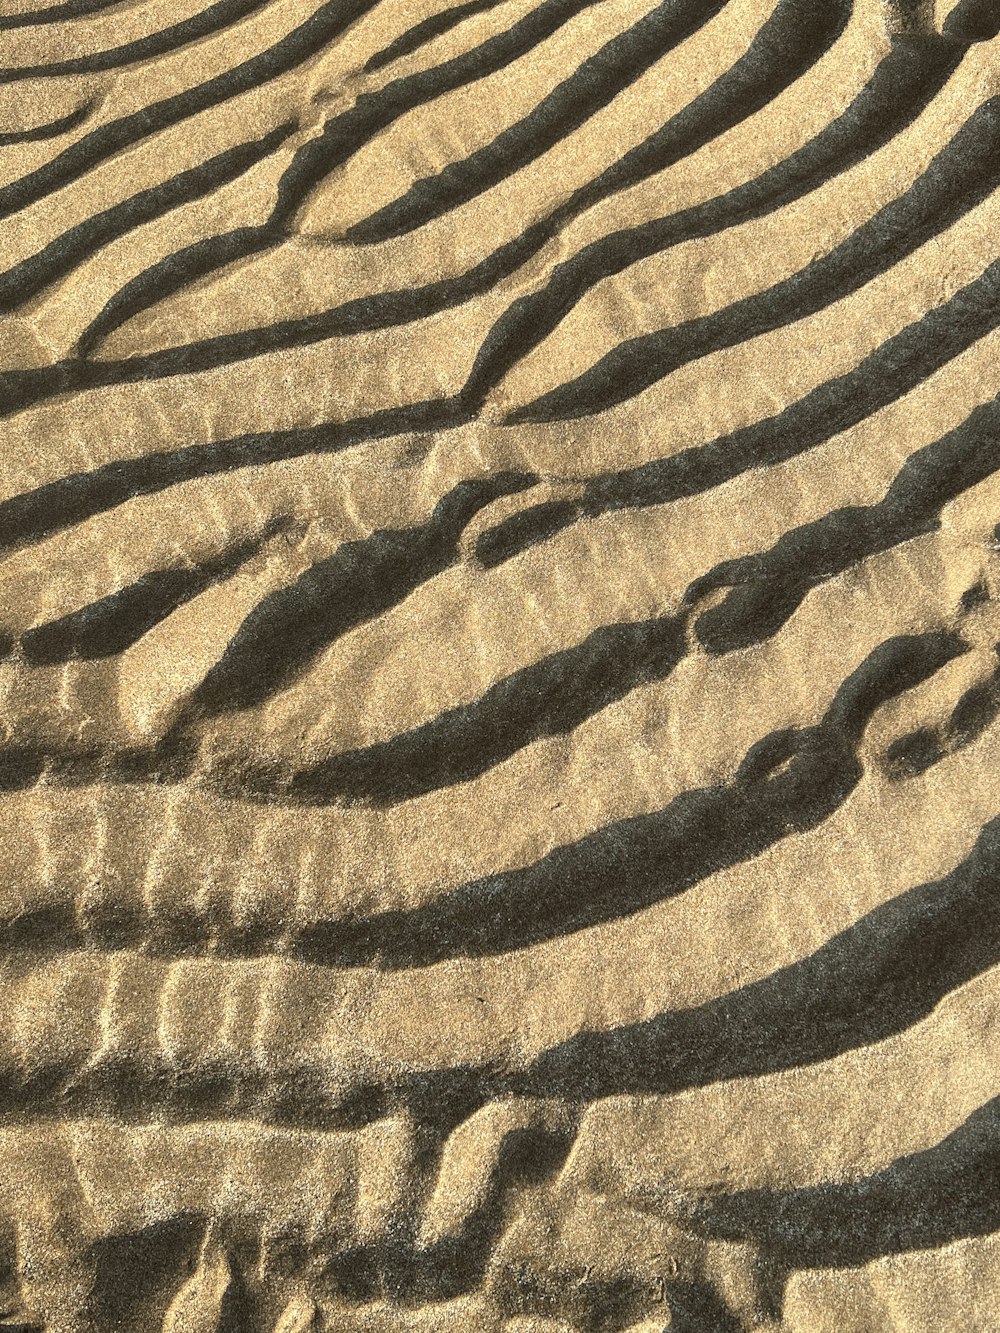 a sandy beach with a wave pattern in the sand